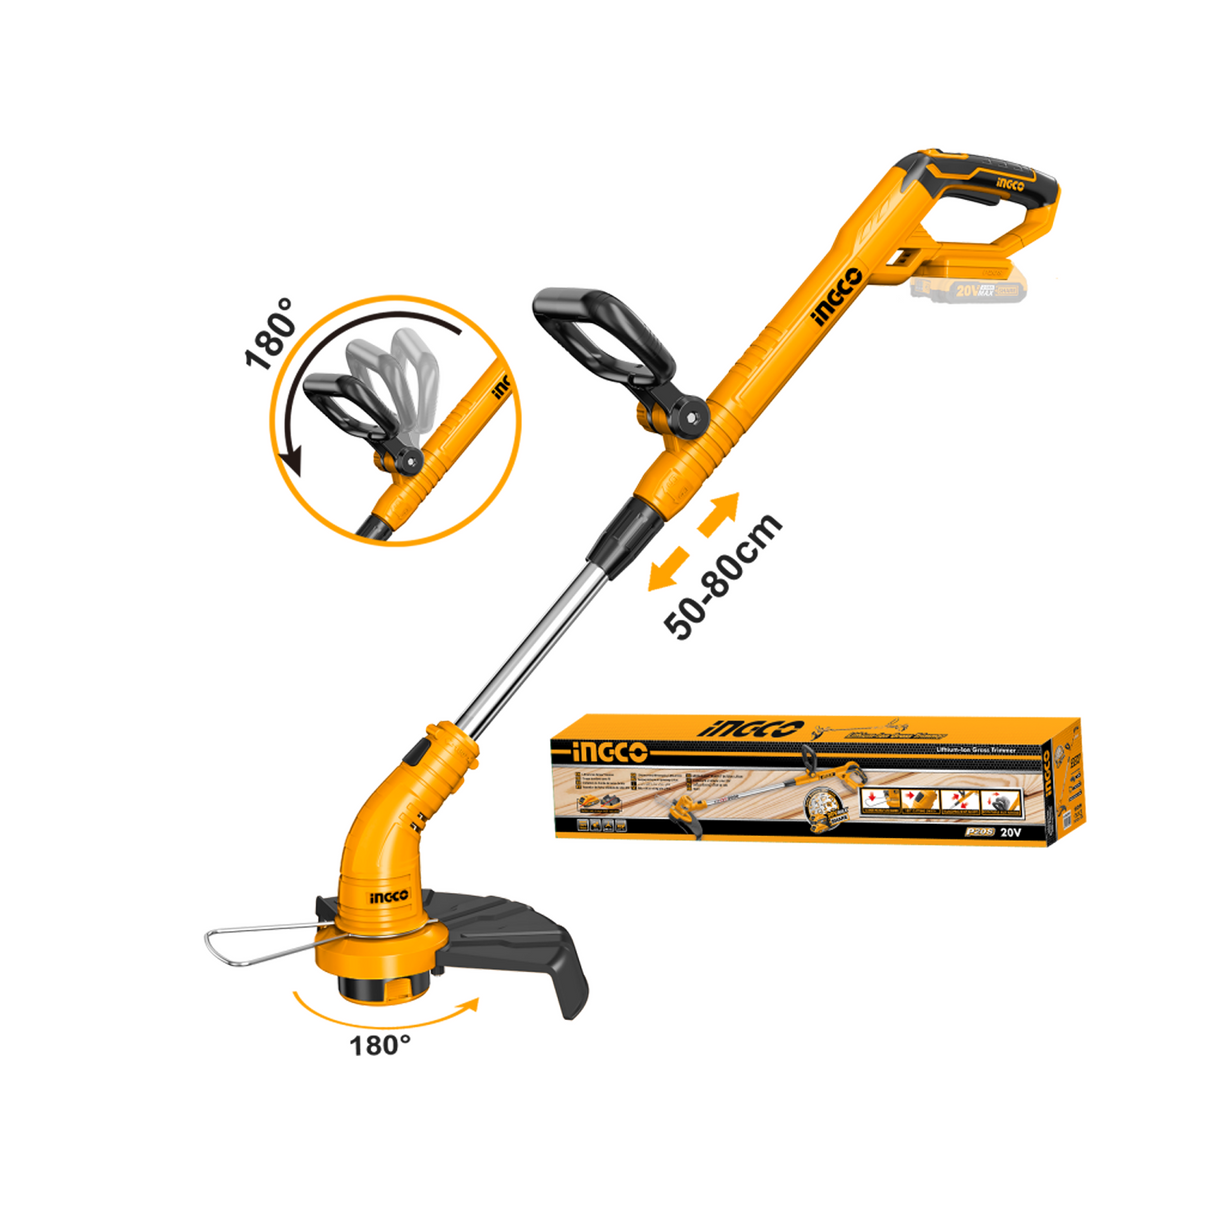 INGCO 20V telescopic trimmer 300MM (battery and charger not included) 